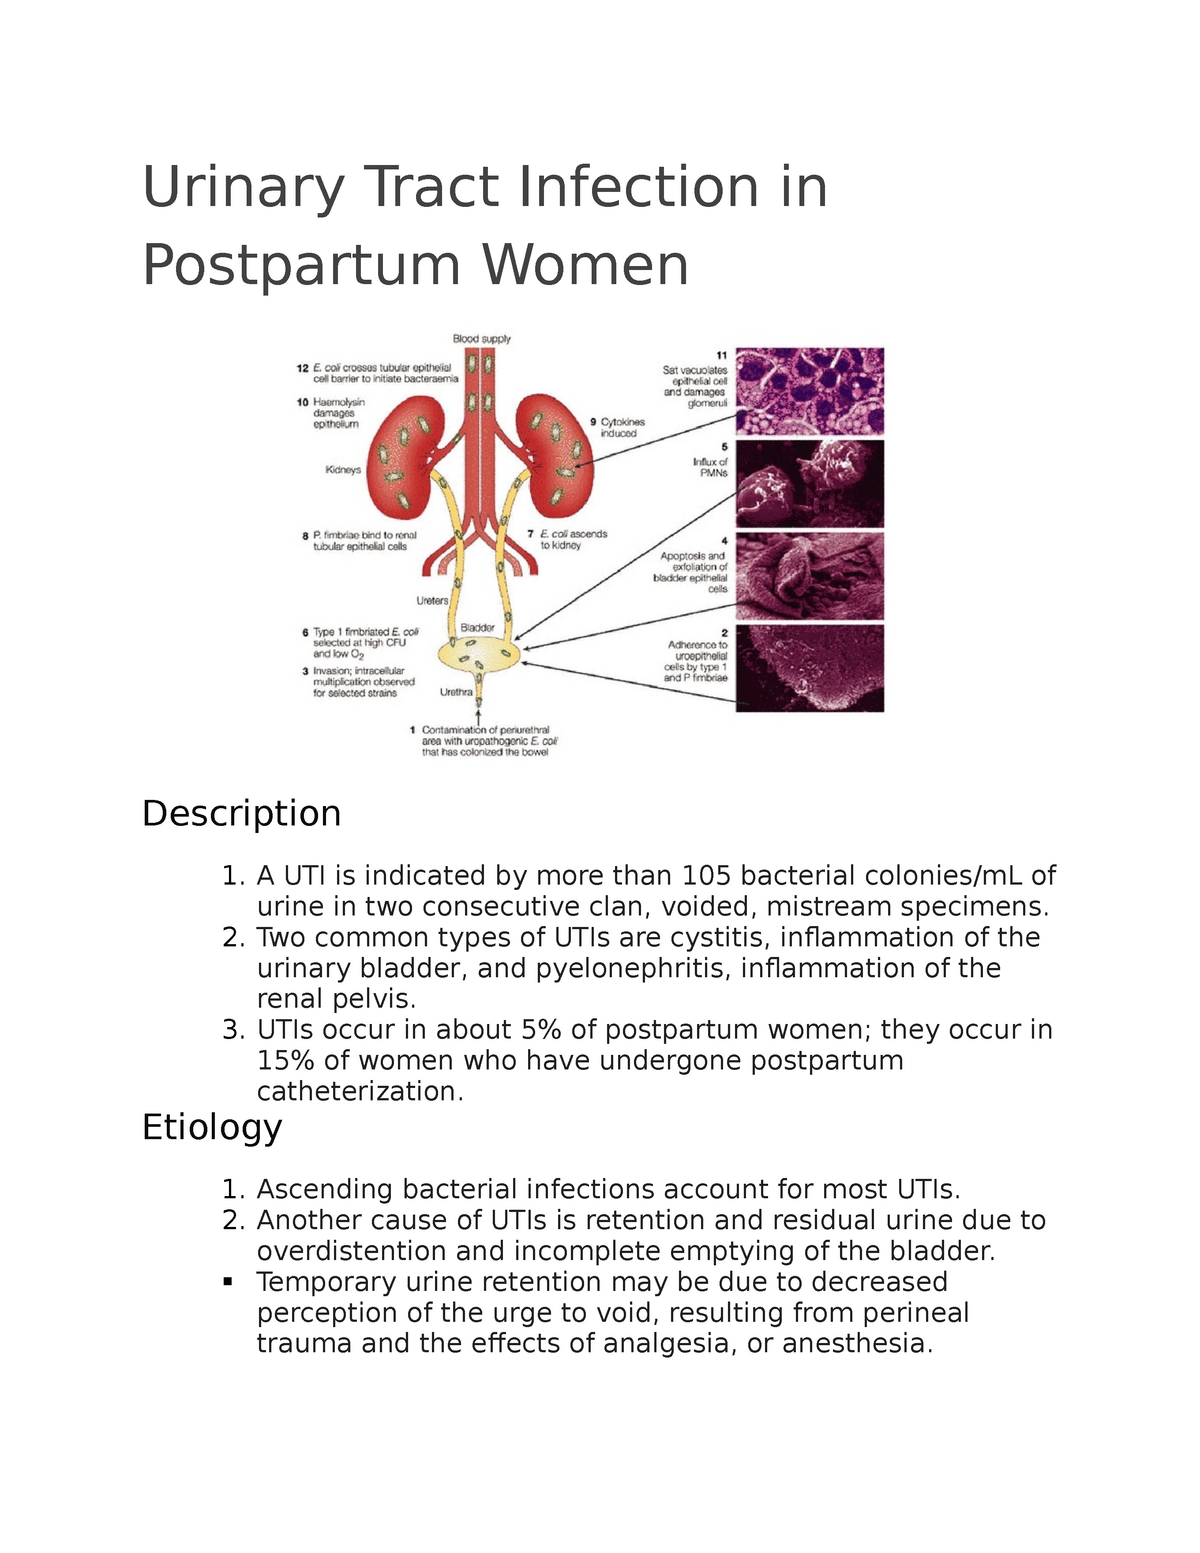 Urinary Tract Infection in Postpartum Women - Urinary Tract